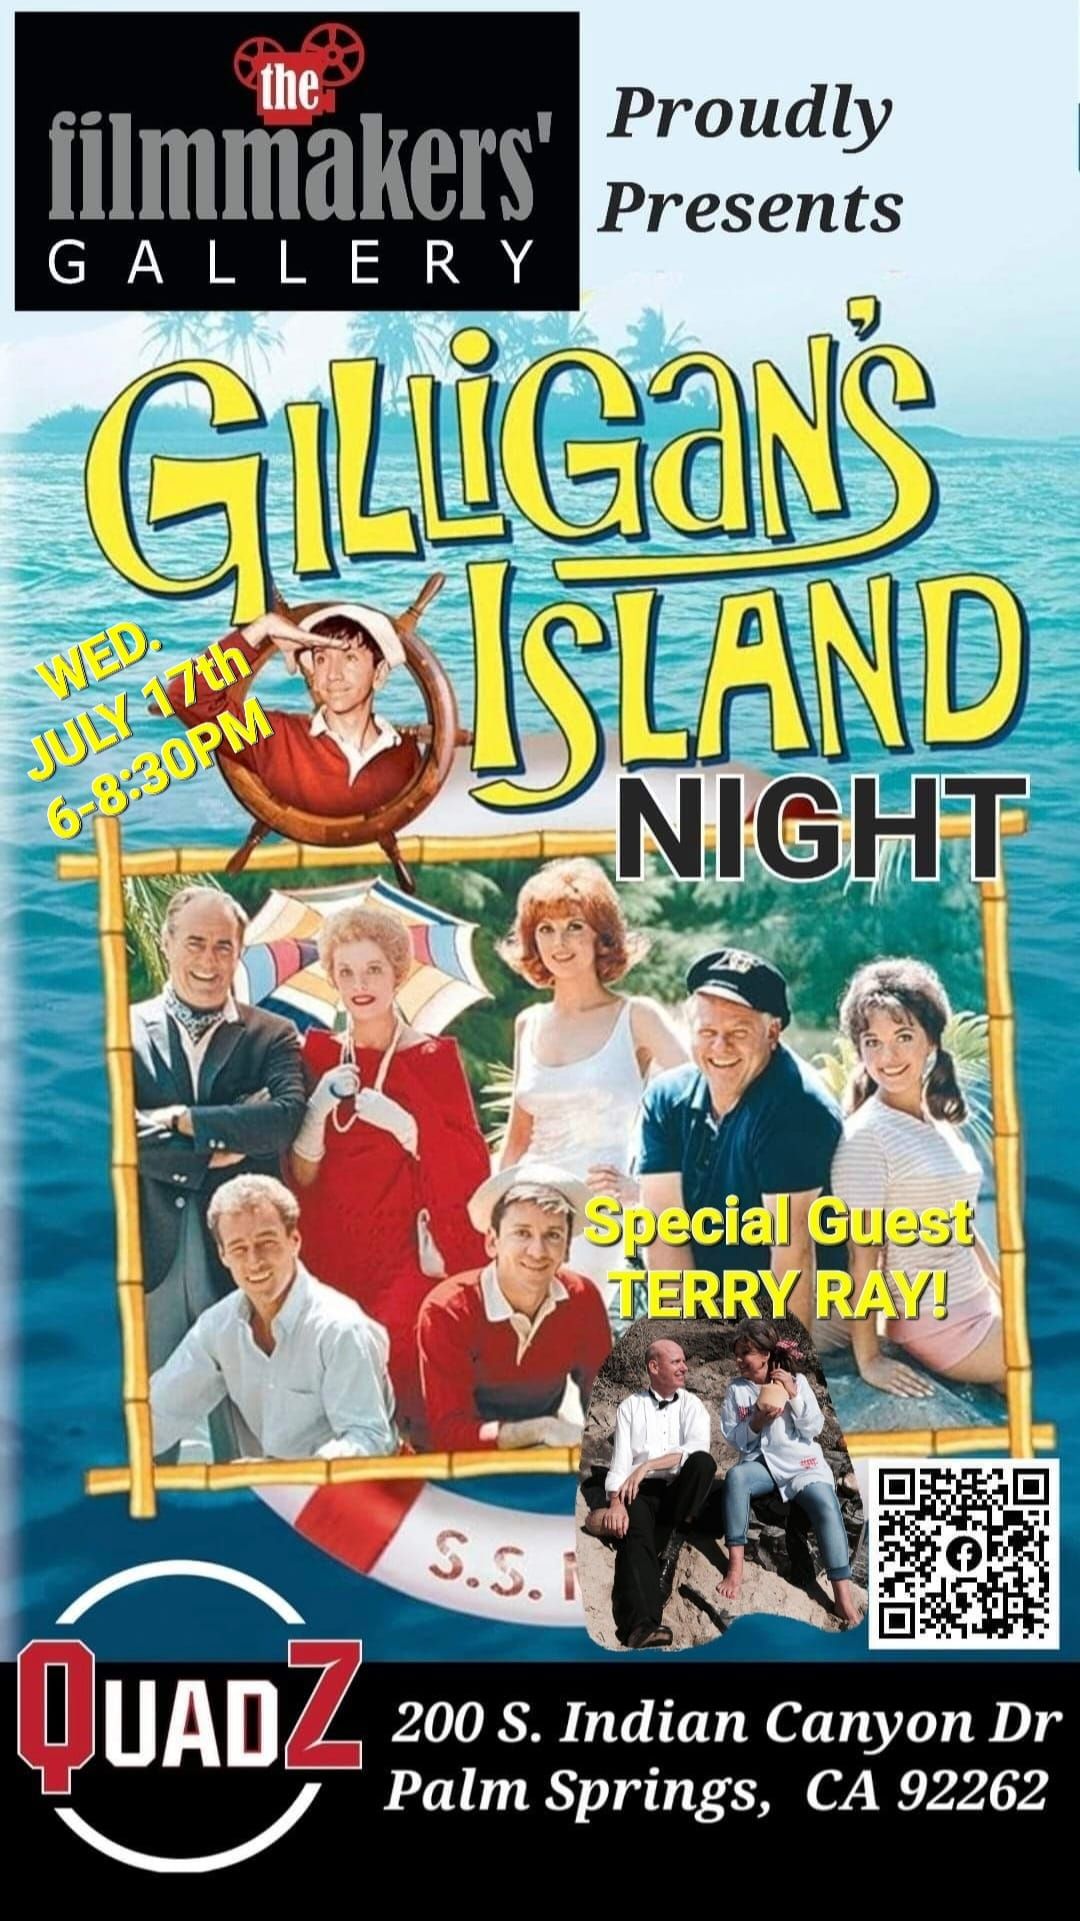 GILLIGAN'S ISLAND NIGHT with Special Guest, TERRY RAY!